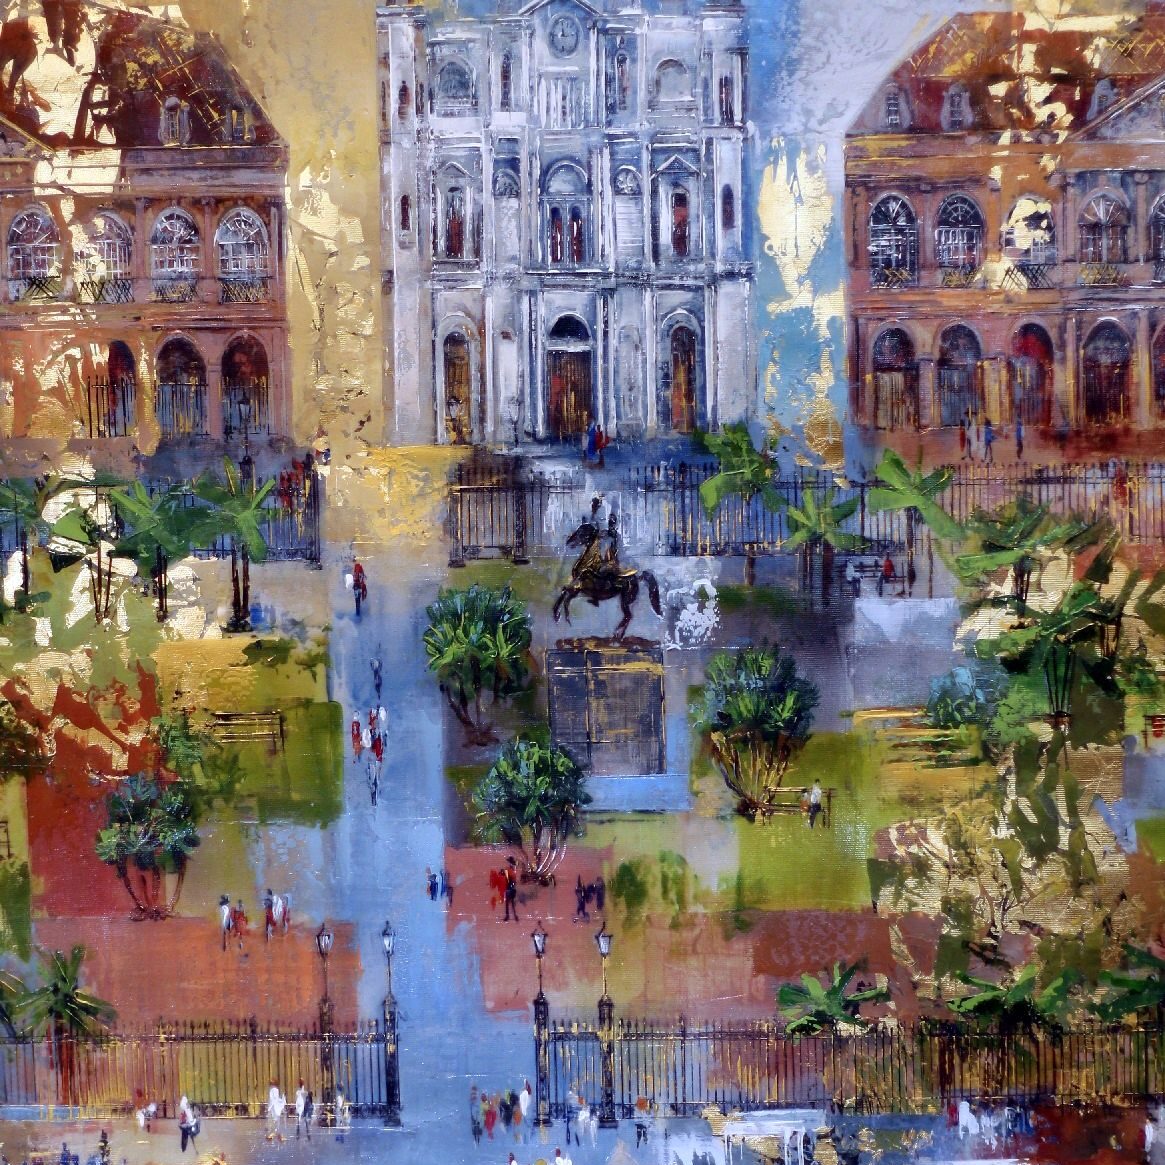 an architectural painting of New Orleans' Jackson Square in the foreground and St. Louis Cathedral in the background. The color palette consists of deep blues, greens, and gold leaf.